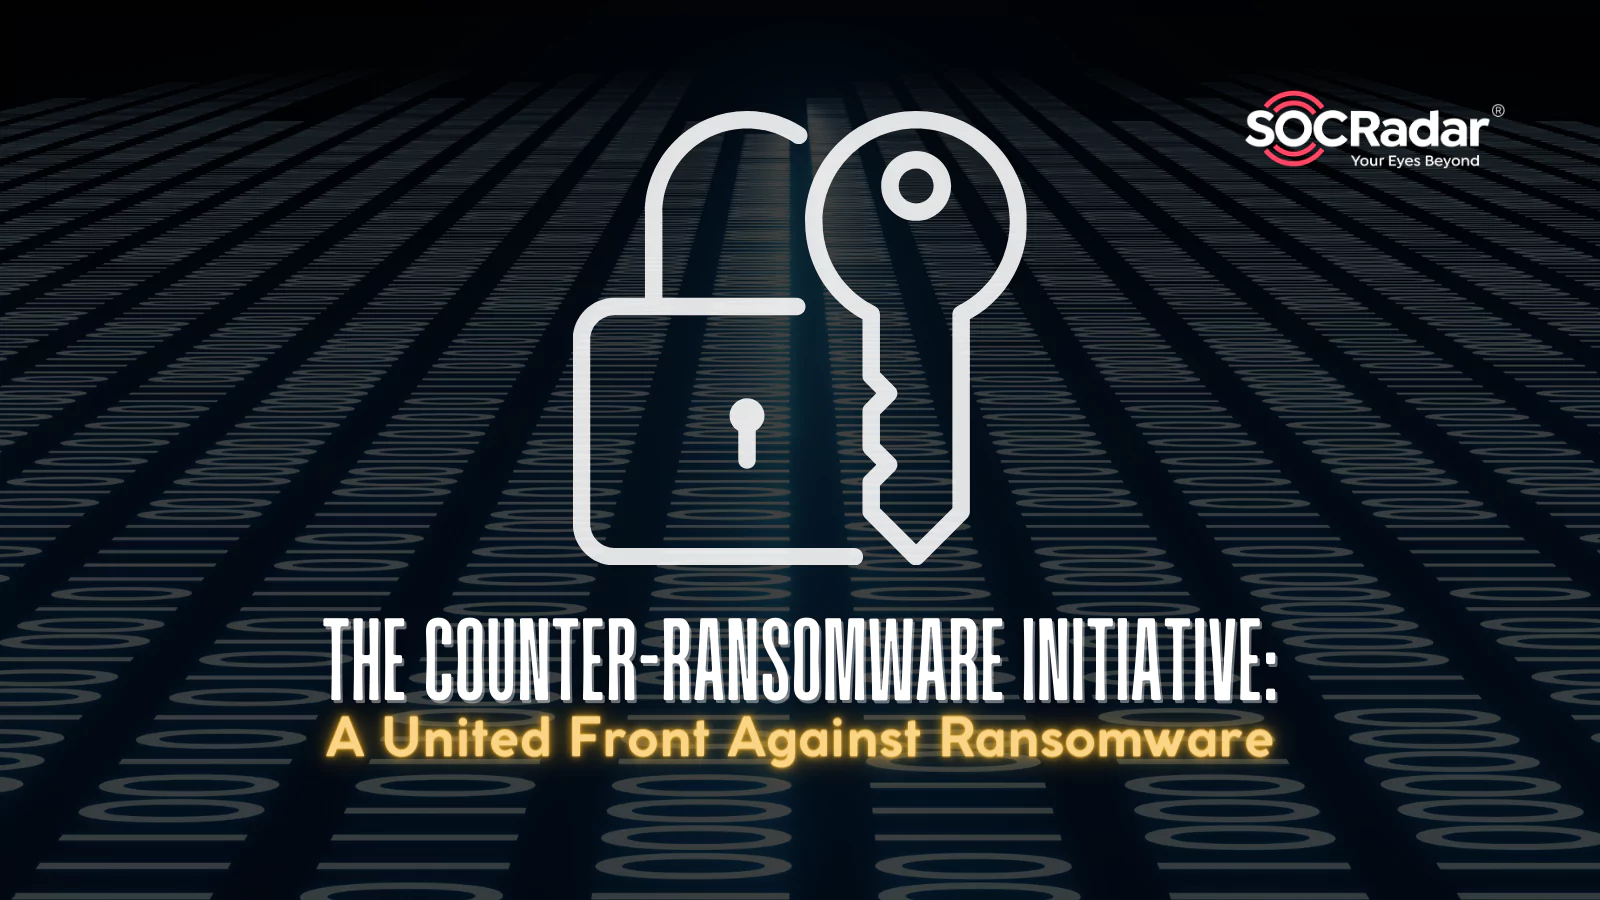 SOCRadar® Cyber Intelligence Inc. | Counter-Ransomware Initiative: A United Front Against Ransomware